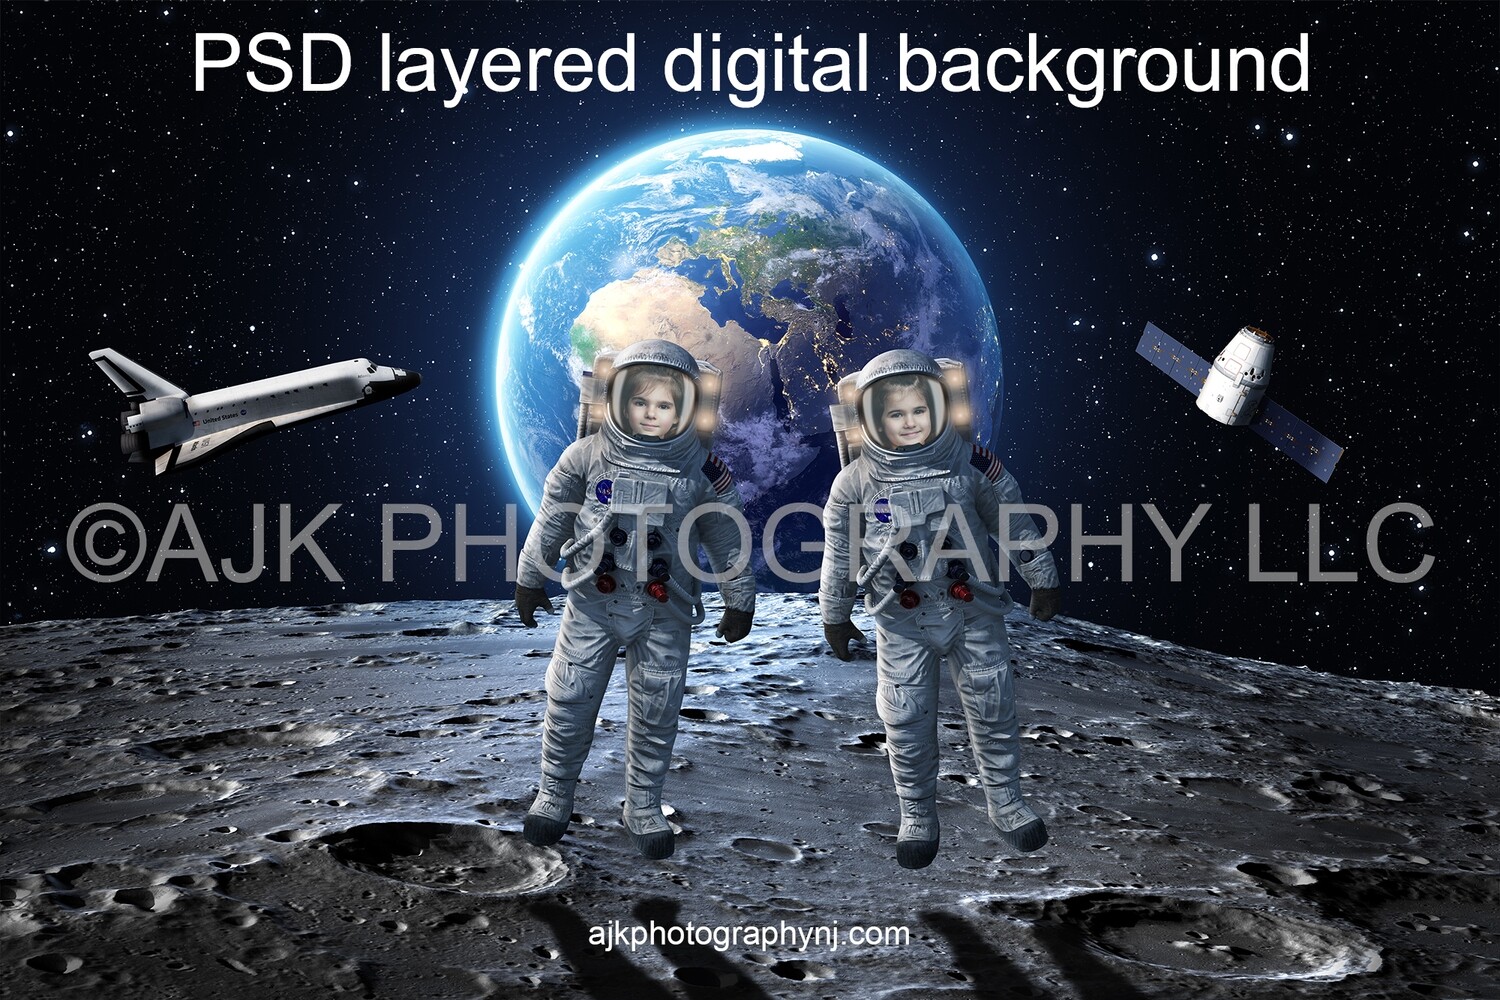 Astronaut digital background, two astronauts in outer space on the moon, with the Earth, space shuttle and satellite behind them